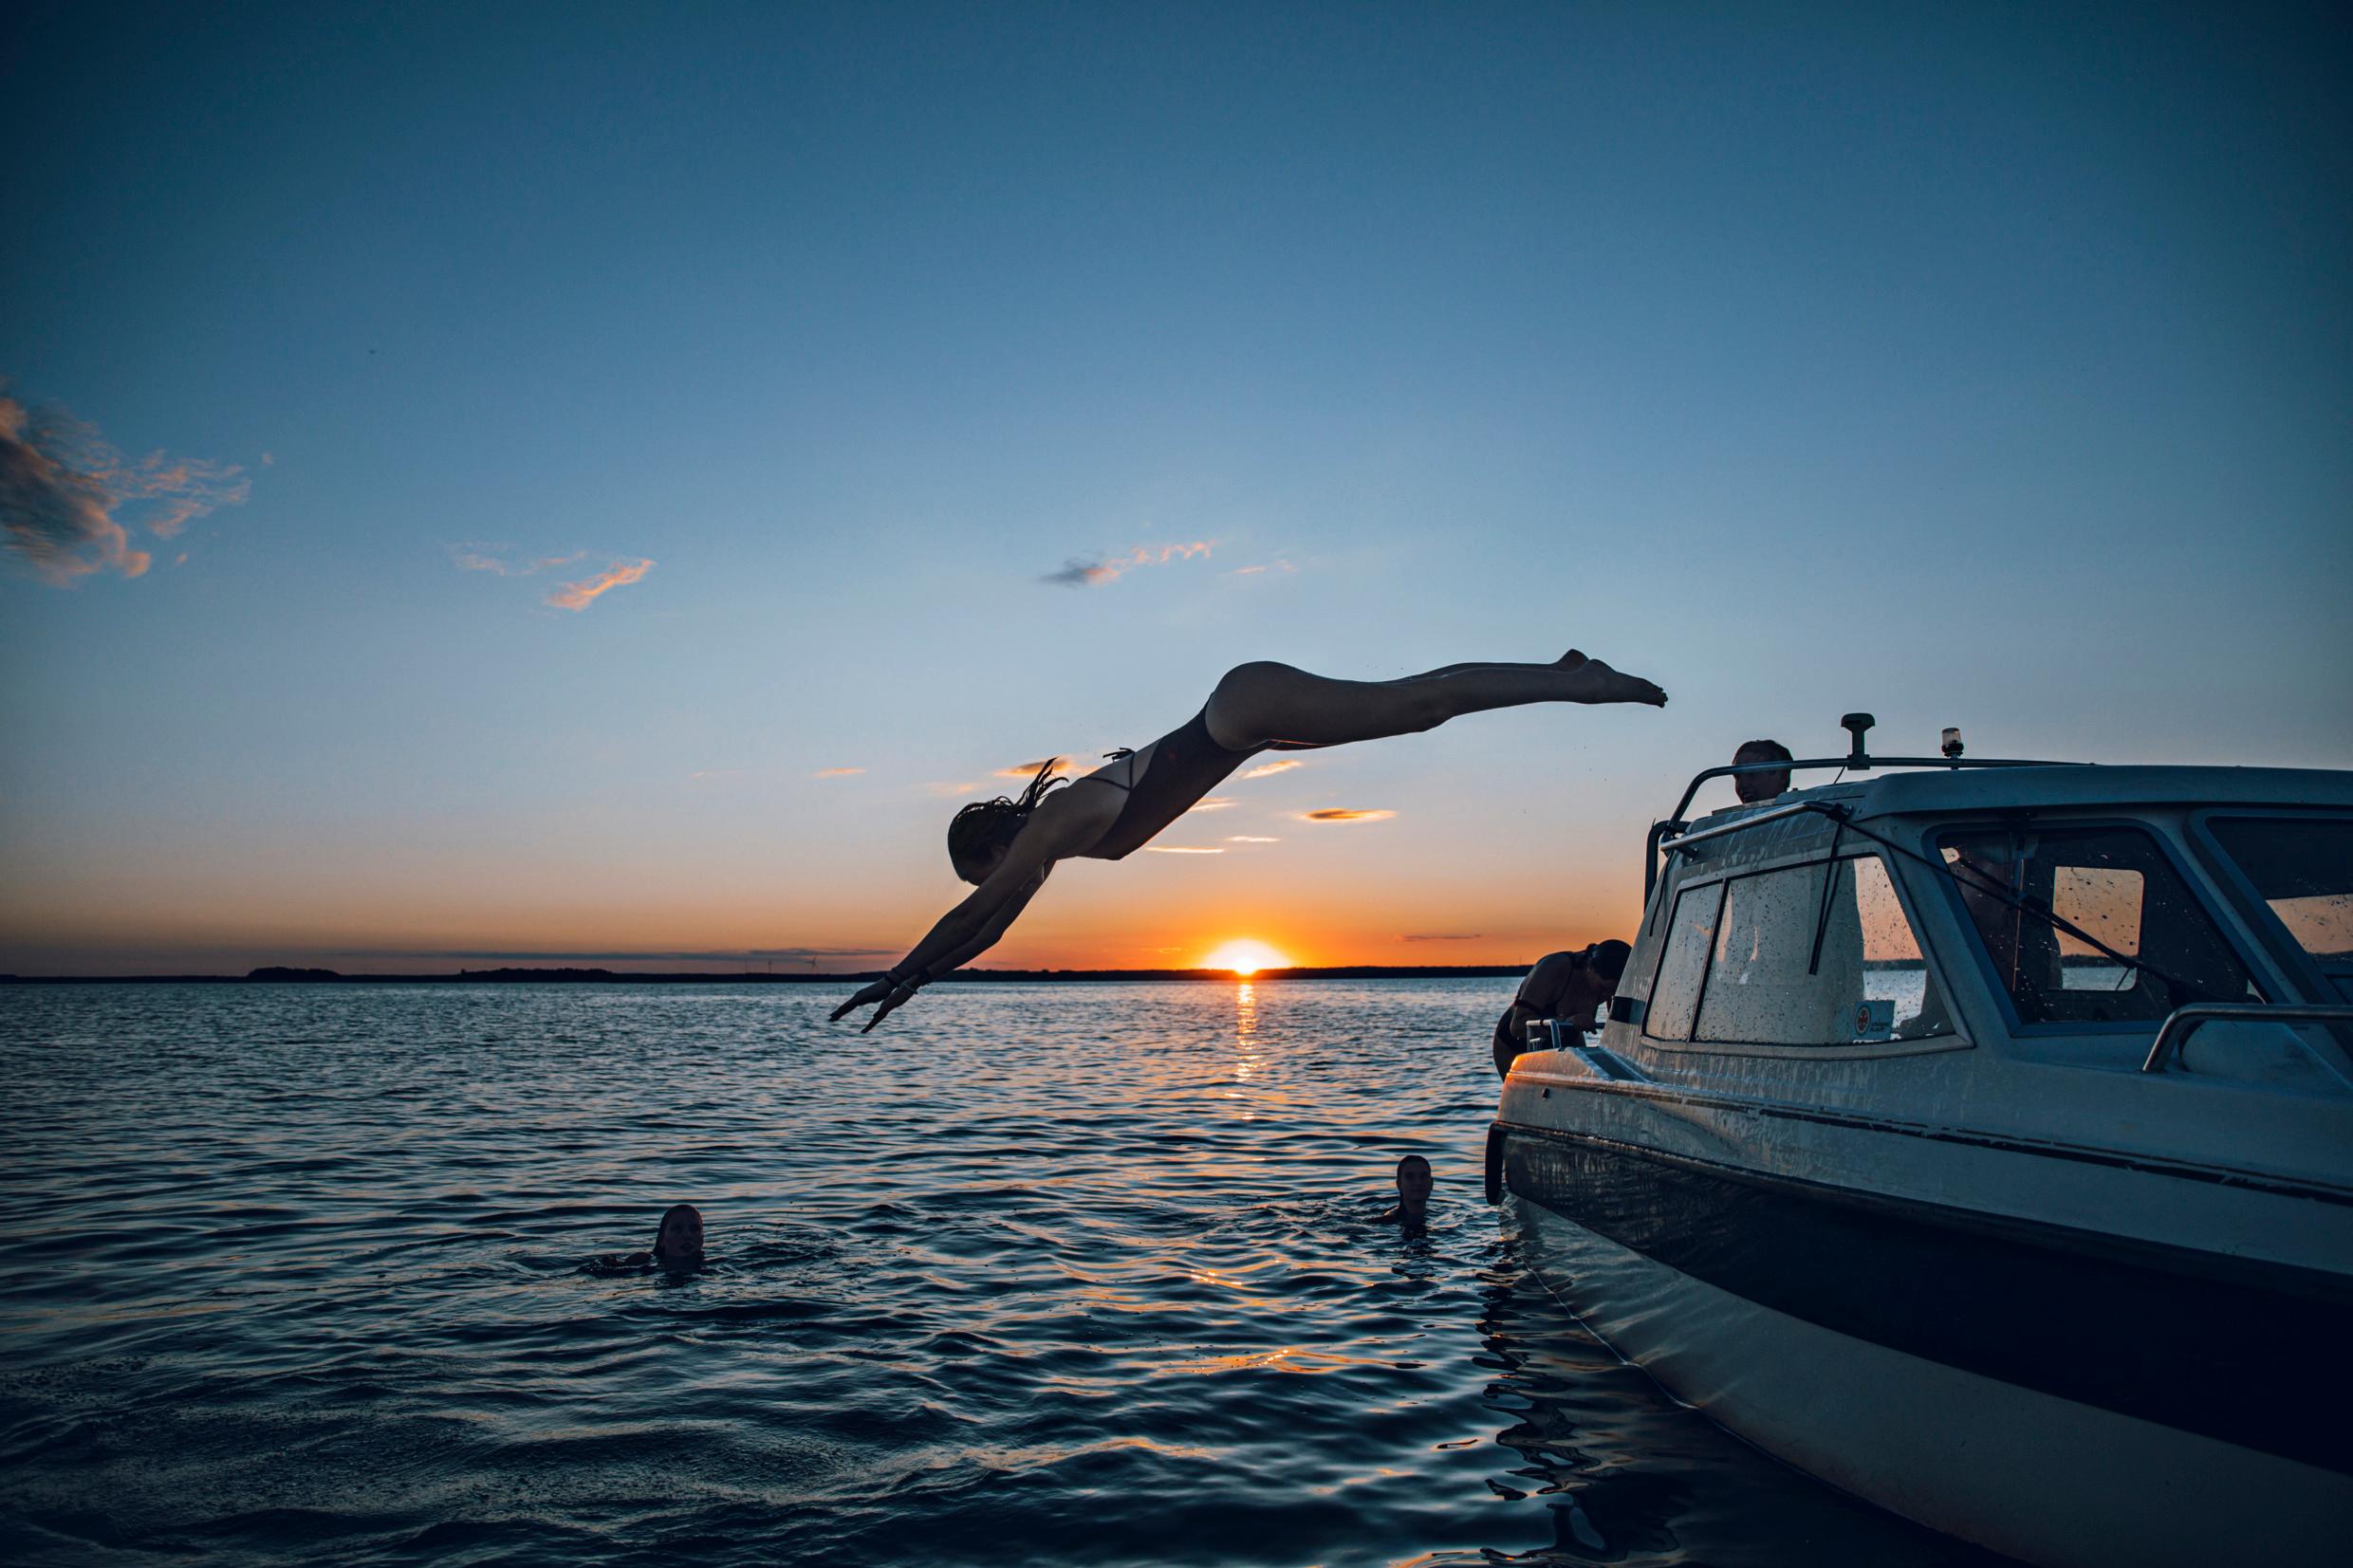 A woman dives into the water from a boat as friends are swimming in the water and the sun is setting.